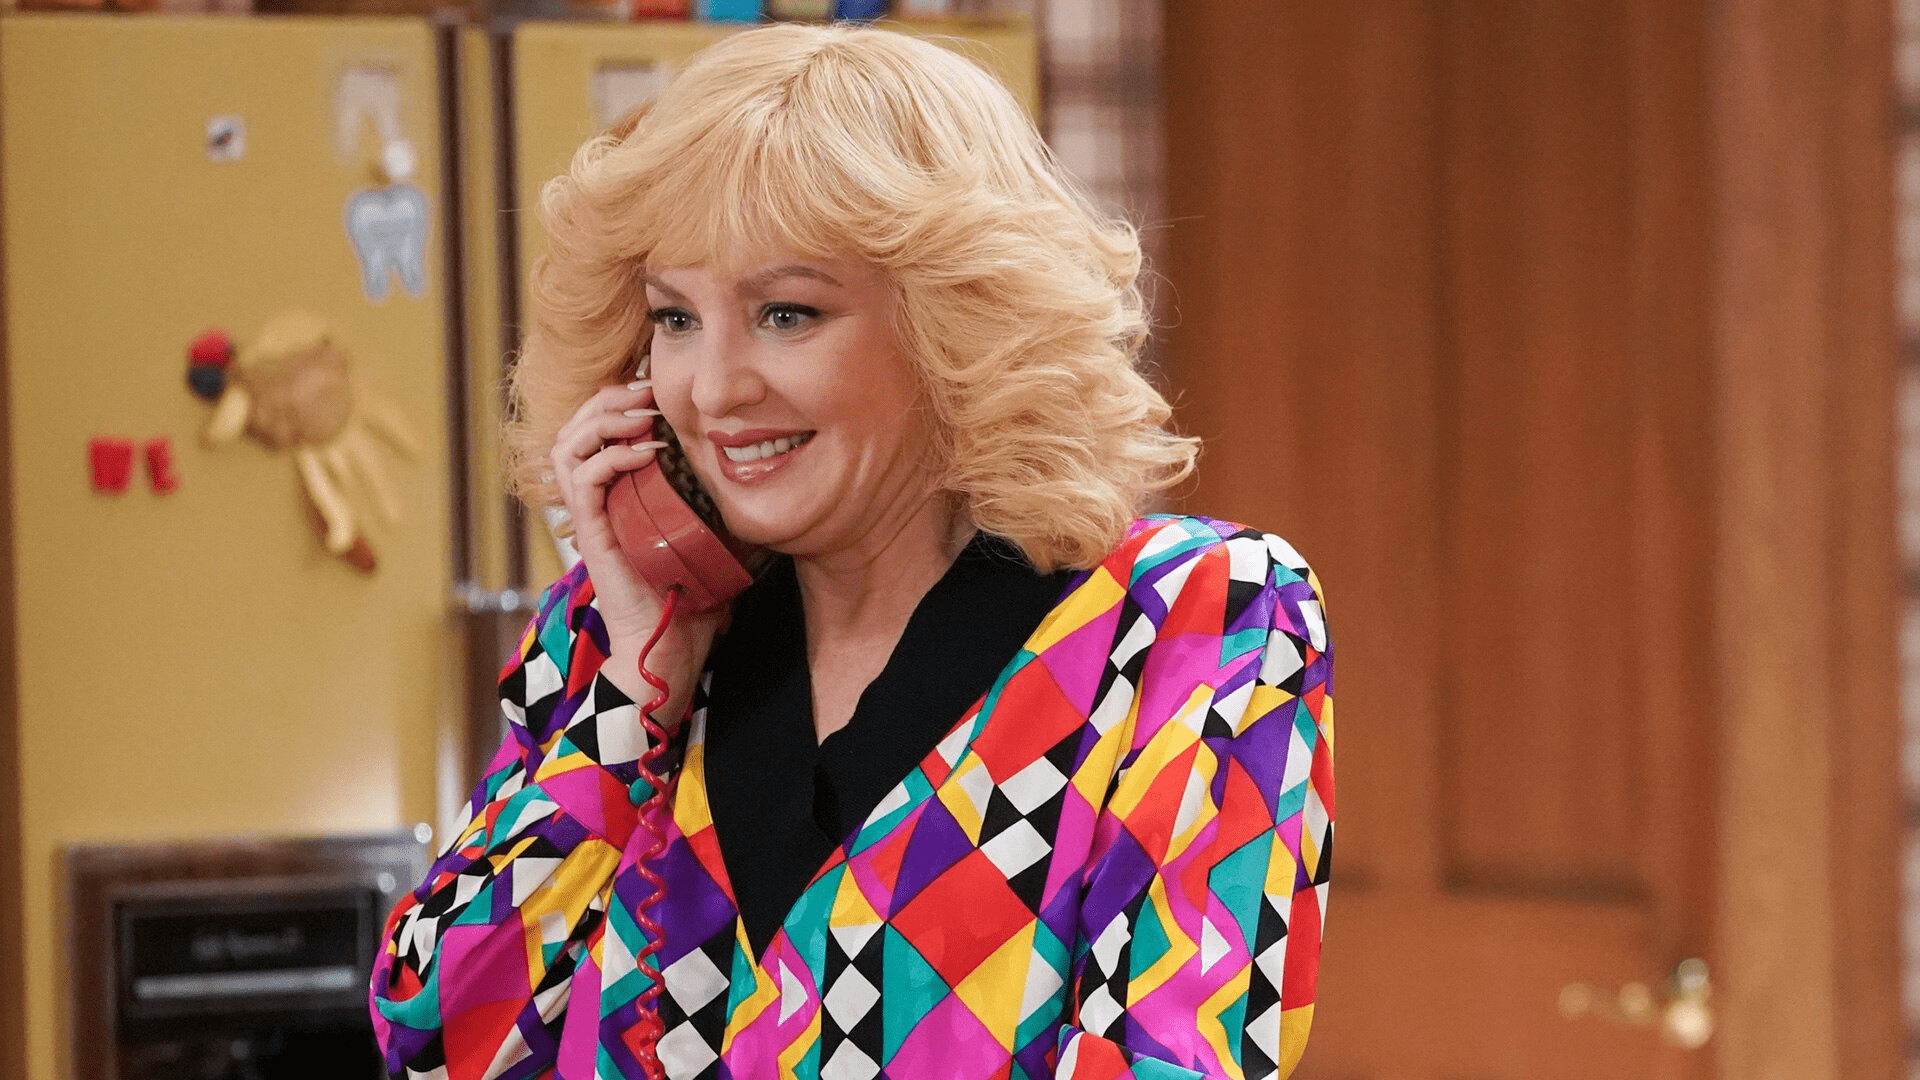 The Goldbergs Cast Facts - 33 Facts About The Goldbergs Cast You Didn’t Know Before